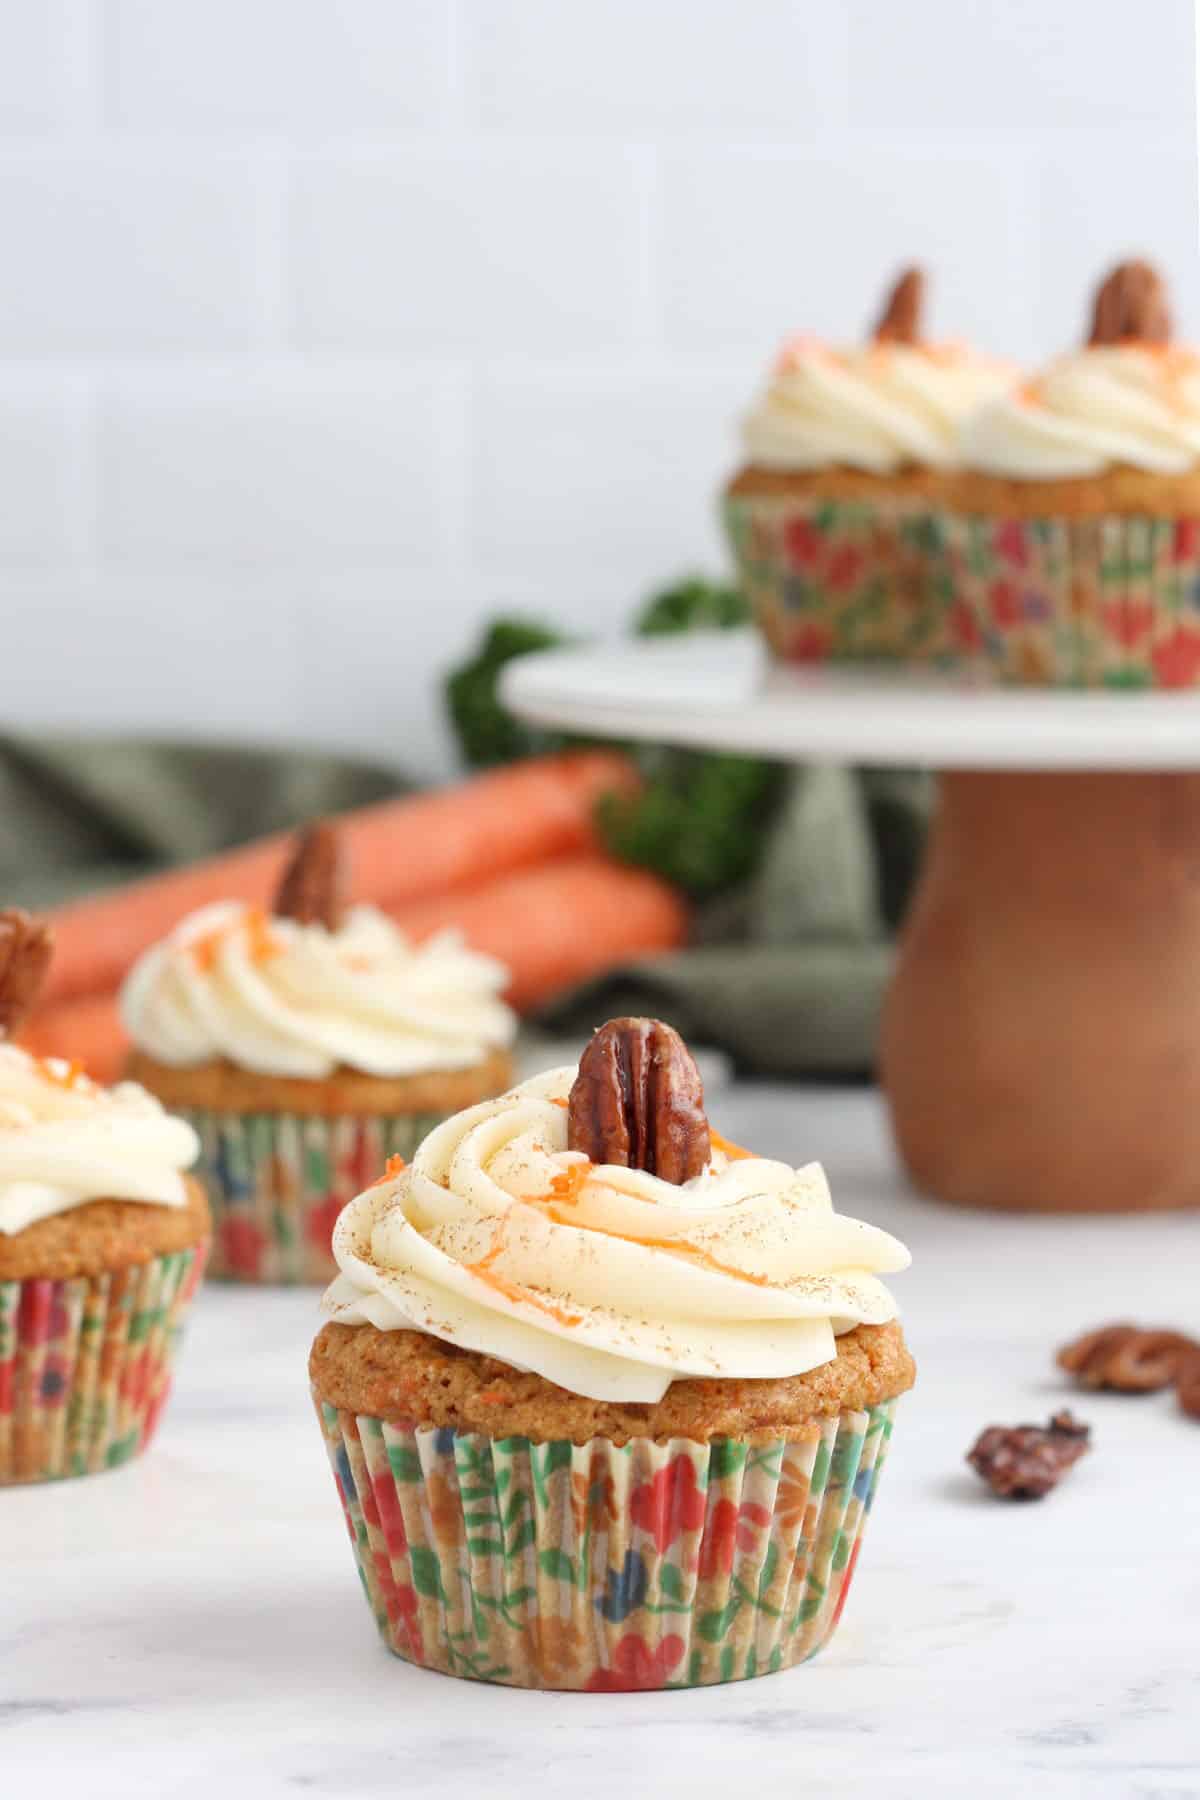 carrot cake pound cake topped with cream cheese frosting and a glazed pecan